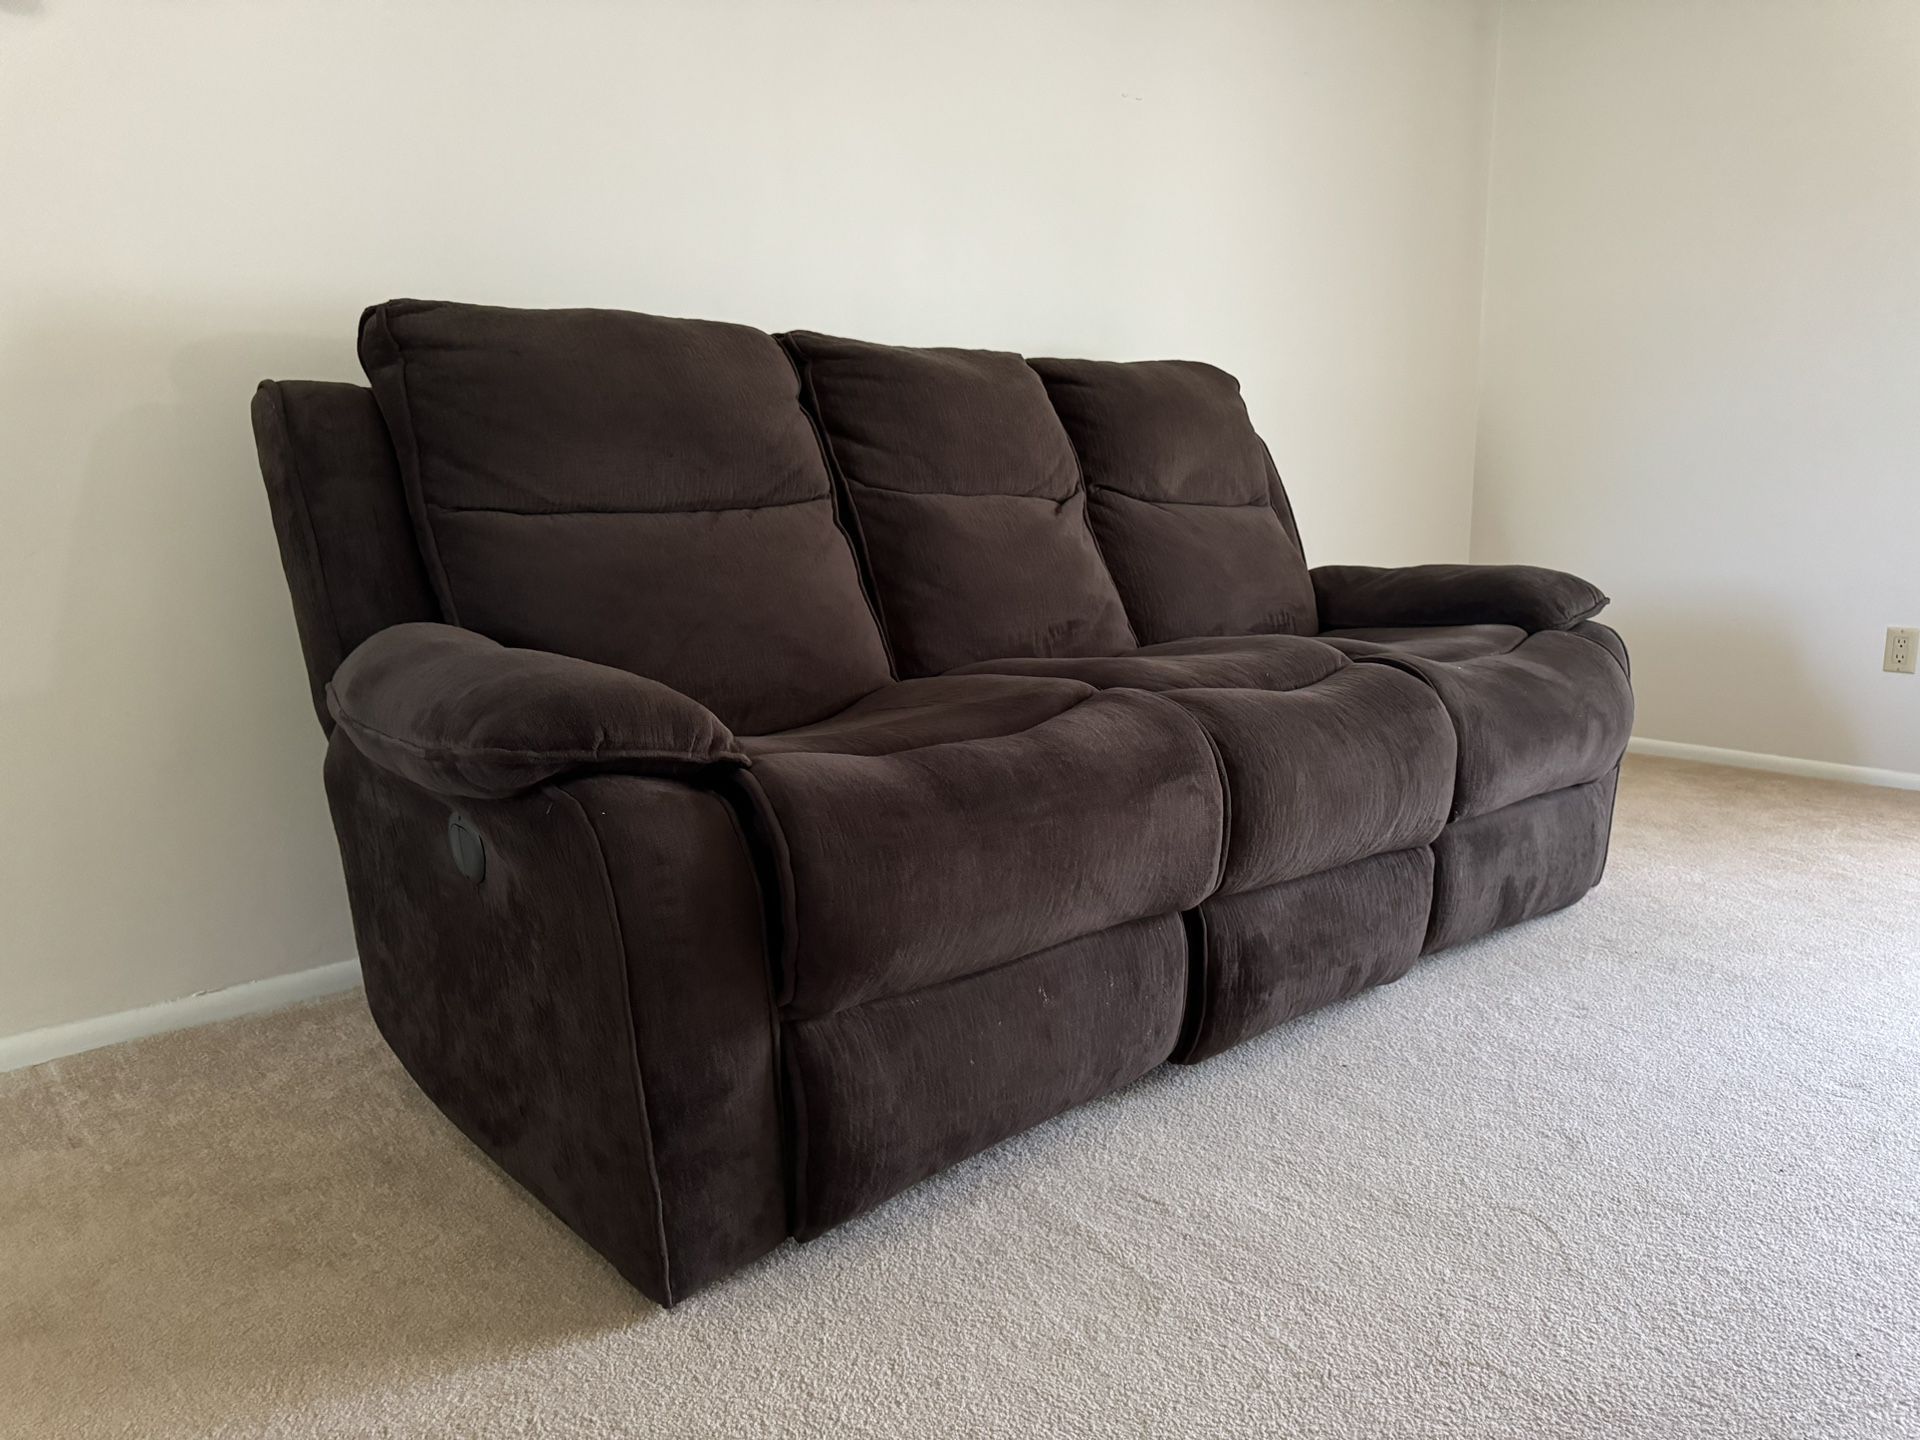 Couch and chair (Reclining/Swiveling)